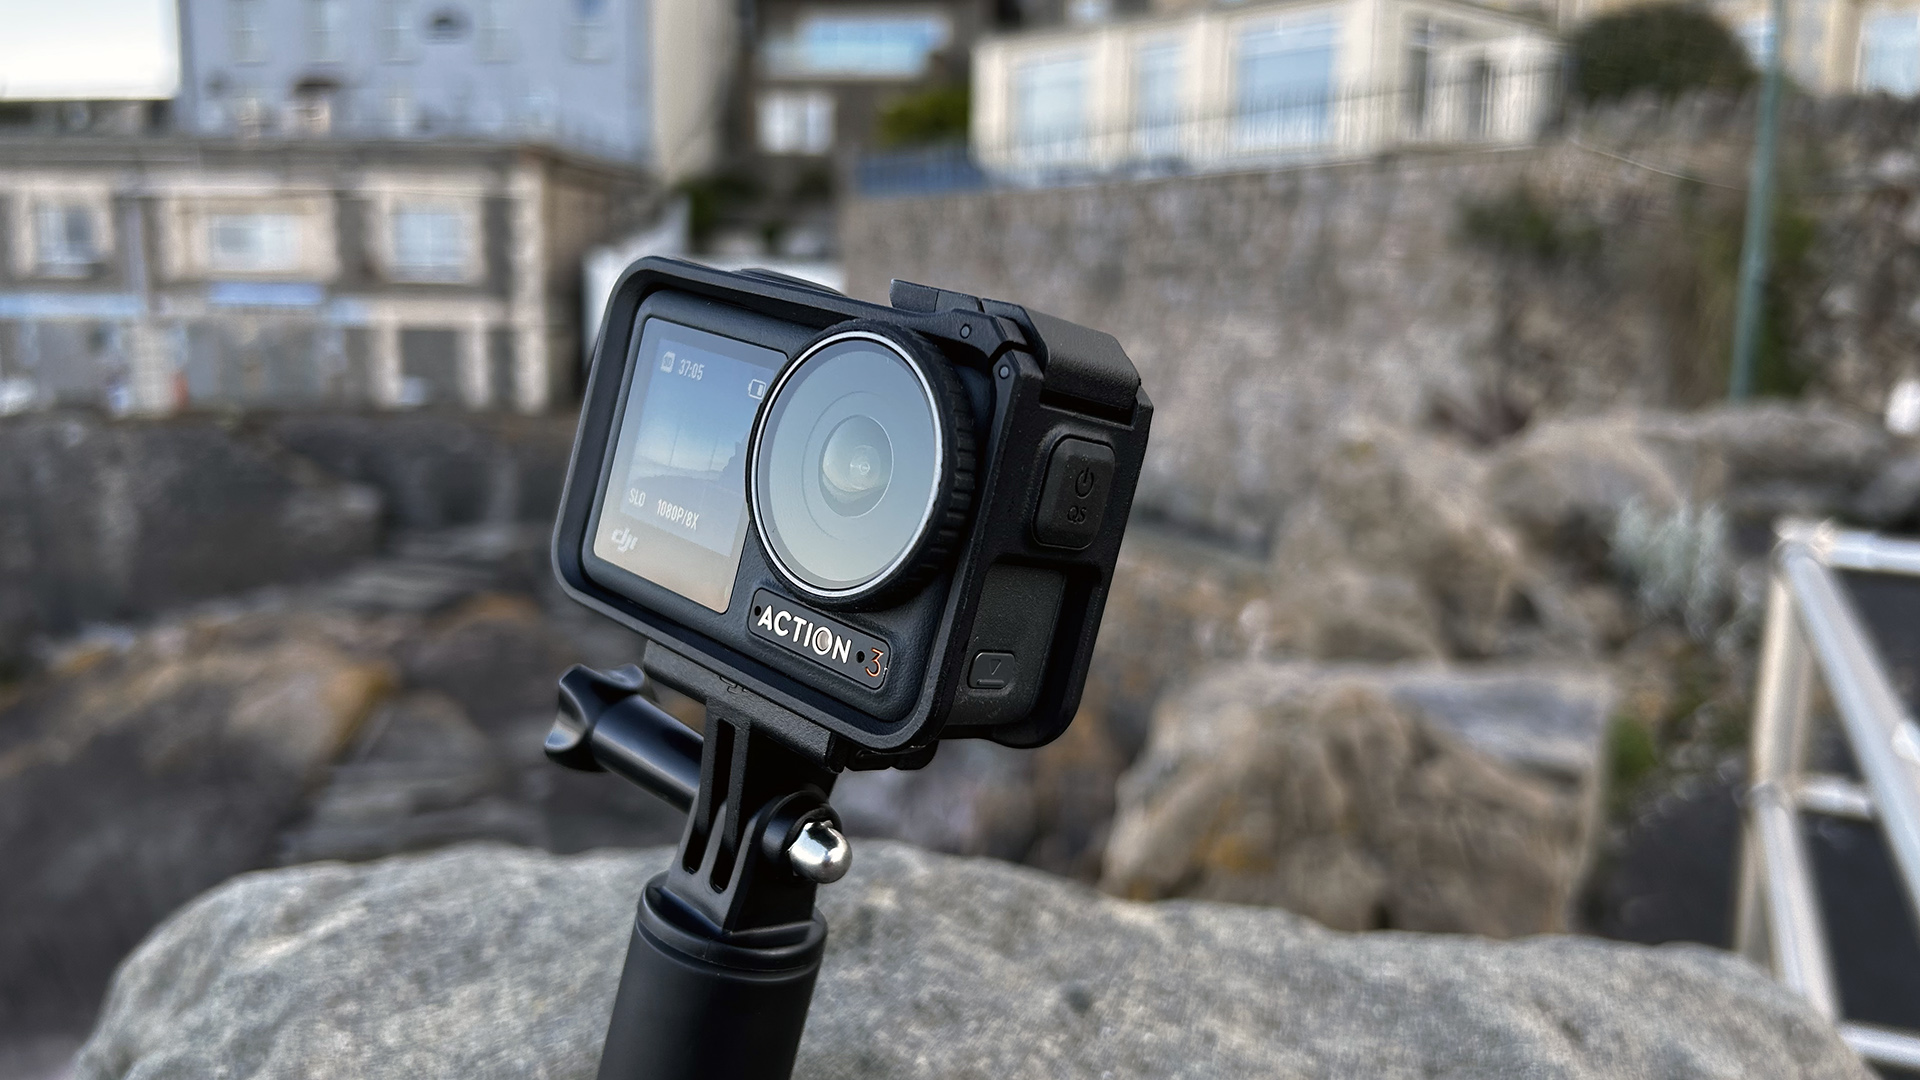 DJI Action 3 reviewed: A serious alternative to GoPro